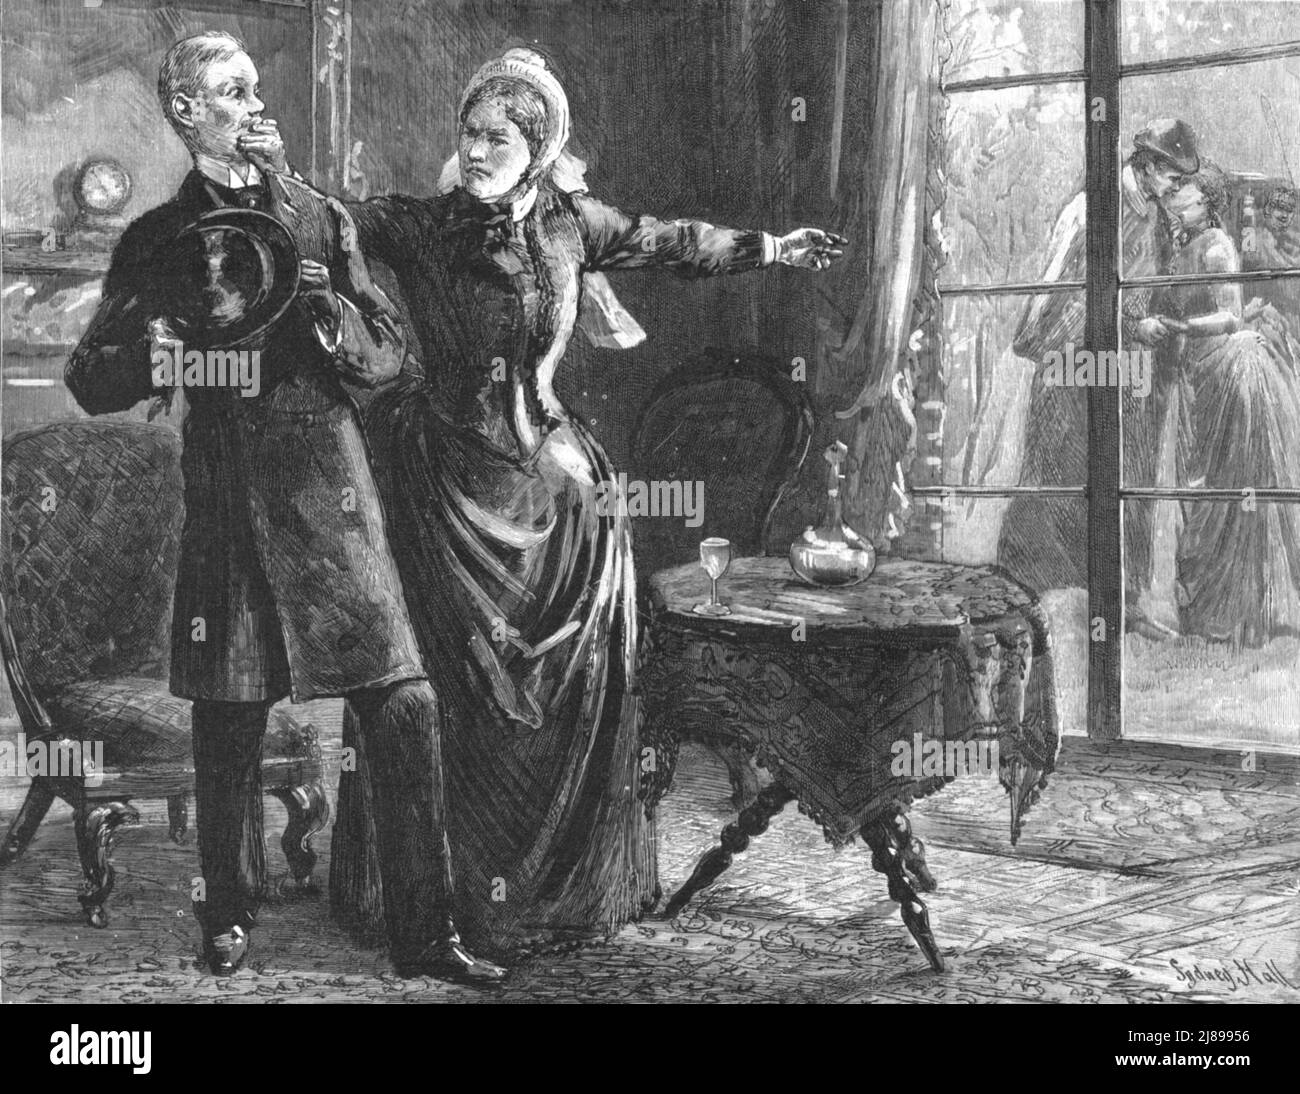 ''That Unfortunate Marriage, by Francis Eleanor Trollope; &quot;Hush! Hold your tongue!&quot; cried Mrs. Dobbs, fairly clapping one hand over his mouth, and pointing with the other to the window', 1888. ', 1888. From, 'The Graphic. An Illustrated Weekly Newspaper Volume 38. July to December, 1888'. Stock Photo